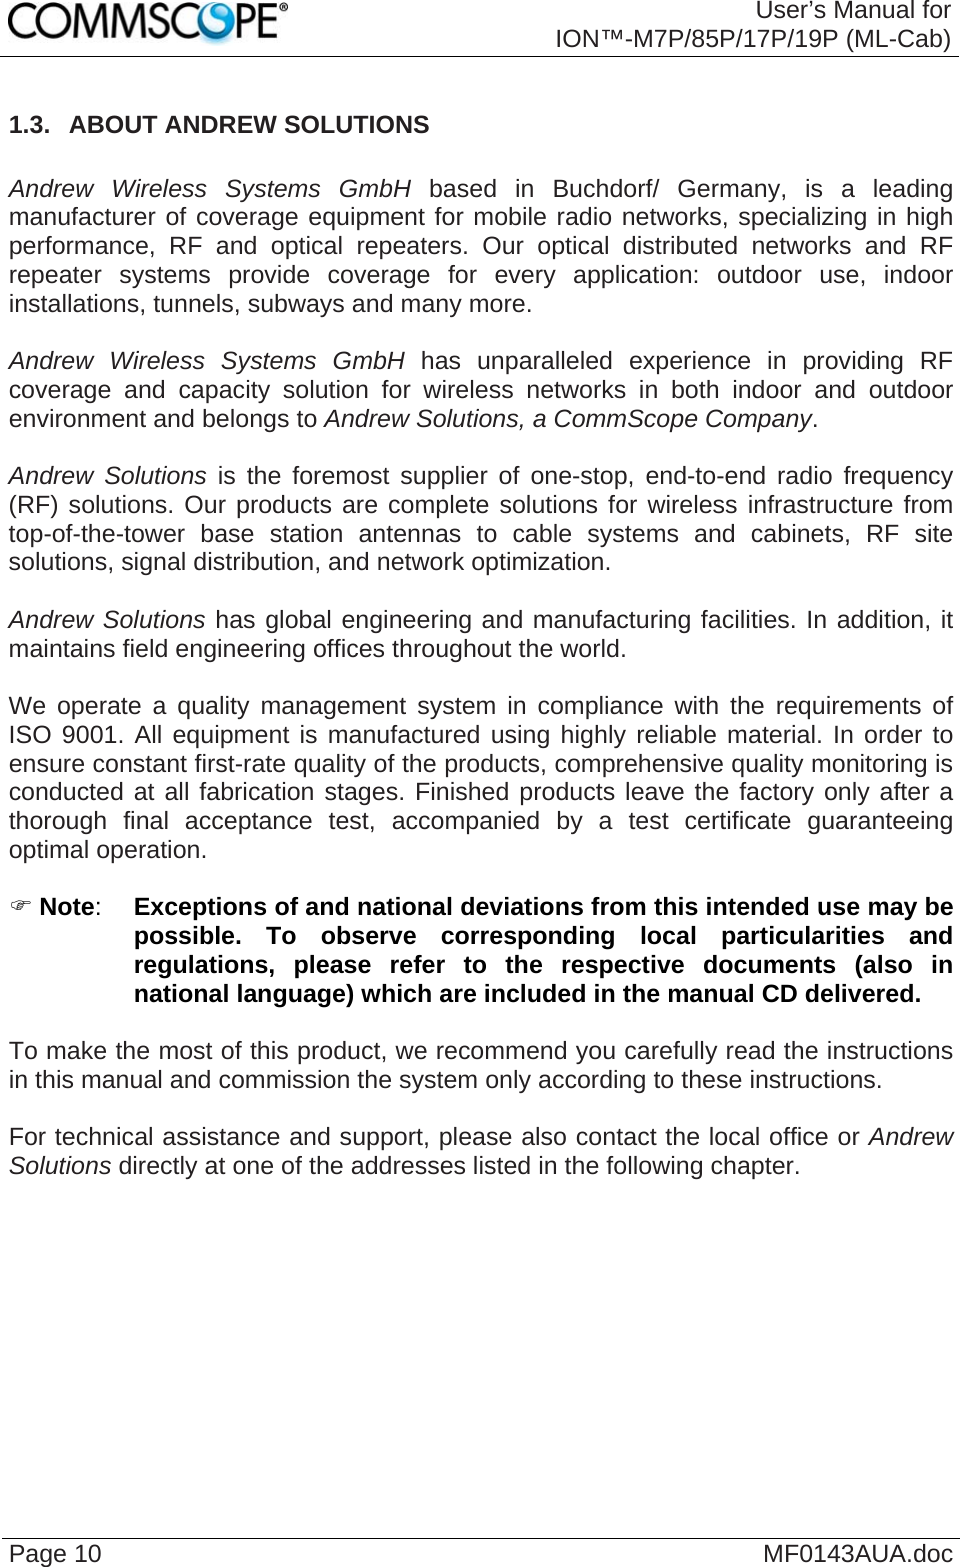  User’s Manual for ION™-M7P/85P/17P/19P (ML-Cab) Page 10  MF0143AUA.doc 1.3.  ABOUT ANDREW SOLUTIONS  Andrew Wireless Systems GmbH based in Buchdorf/ Germany, is a leading manufacturer of coverage equipment for mobile radio networks, specializing in high performance, RF and optical repeaters. Our optical distributed networks and RF repeater systems provide coverage for every application: outdoor use, indoor installations, tunnels, subways and many more.  Andrew Wireless Systems GmbH has unparalleled experience in providing RF coverage and capacity solution for wireless networks in both indoor and outdoor environment and belongs to Andrew Solutions, a CommScope Company.  Andrew Solutions is the foremost supplier of one-stop, end-to-end radio frequency (RF) solutions. Our products are complete solutions for wireless infrastructure from top-of-the-tower base station antennas to cable systems and cabinets, RF site solutions, signal distribution, and network optimization.  Andrew Solutions has global engineering and manufacturing facilities. In addition, it maintains field engineering offices throughout the world.  We operate a quality management system in compliance with the requirements of ISO 9001. All equipment is manufactured using highly reliable material. In order to ensure constant first-rate quality of the products, comprehensive quality monitoring is conducted at all fabrication stages. Finished products leave the factory only after a thorough final acceptance test, accompanied by a test certificate guaranteeing optimal operation.  ) Note:  Exceptions of and national deviations from this intended use may be possible. To observe corresponding local particularities and regulations, please refer to the respective documents (also in national language) which are included in the manual CD delivered.  To make the most of this product, we recommend you carefully read the instructions in this manual and commission the system only according to these instructions.   For technical assistance and support, please also contact the local office or Andrew Solutions directly at one of the addresses listed in the following chapter.    